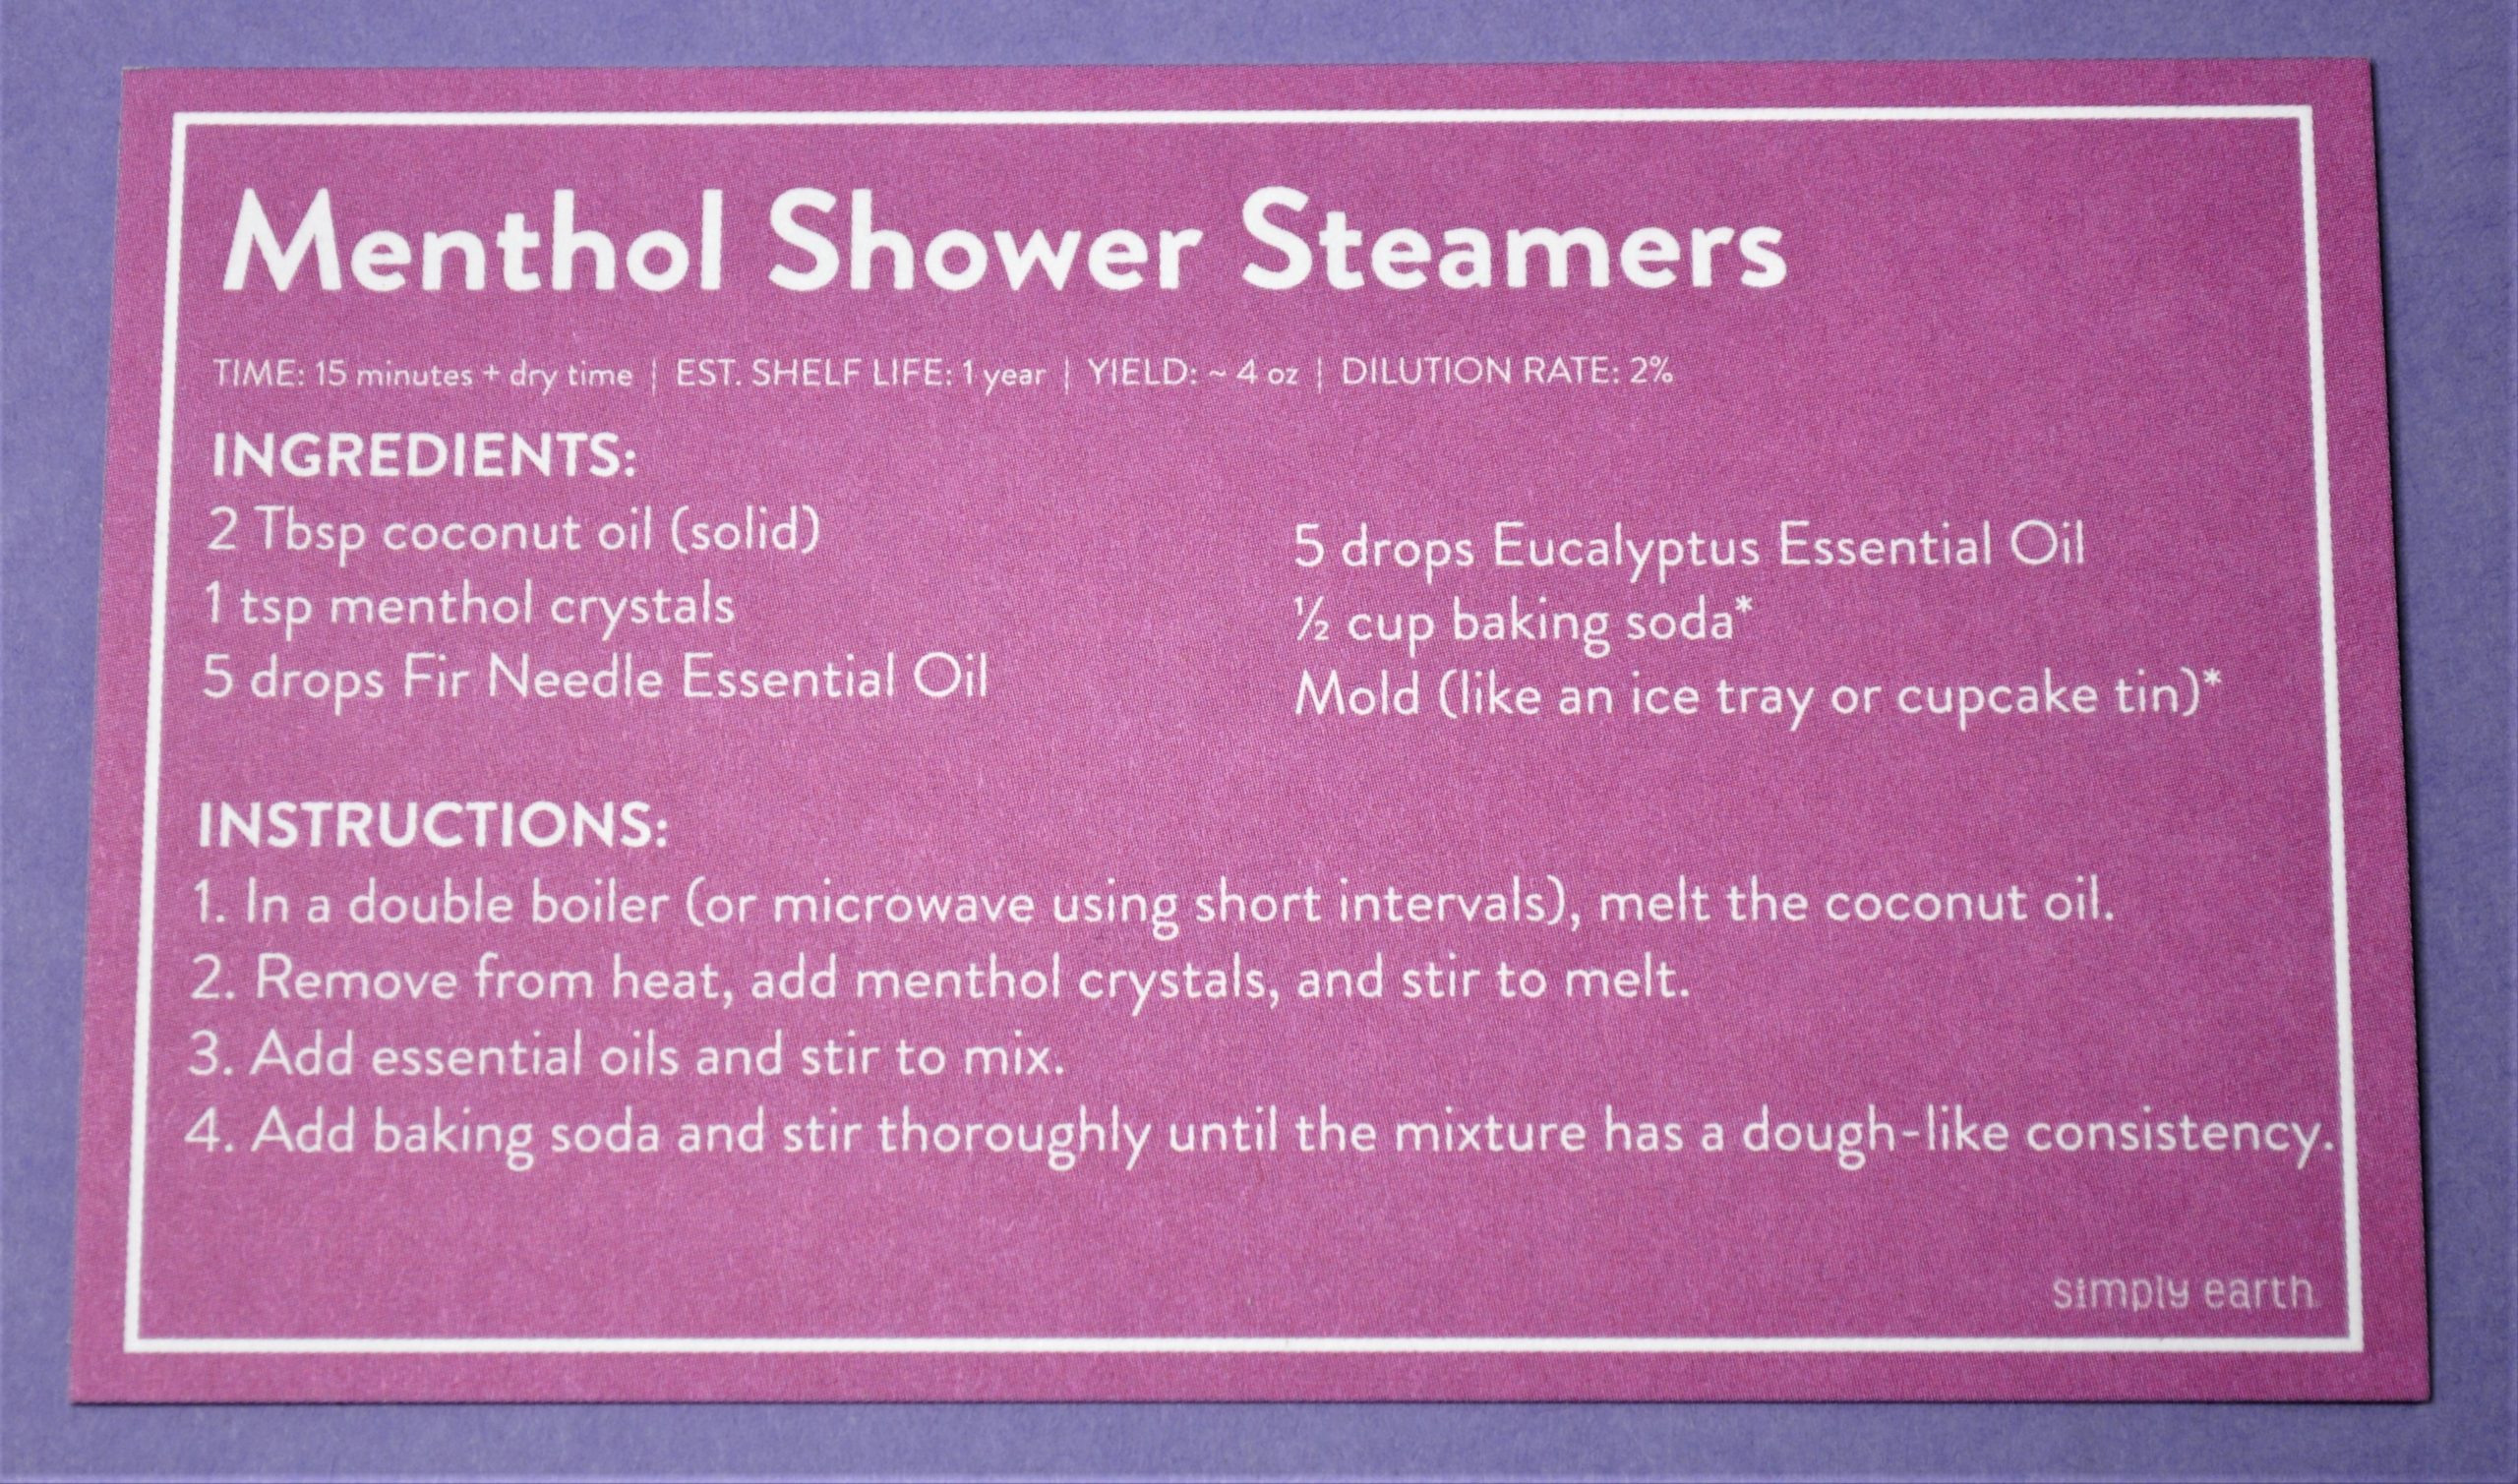 Simply Earth Menthol Shower Steamer Recipe Card